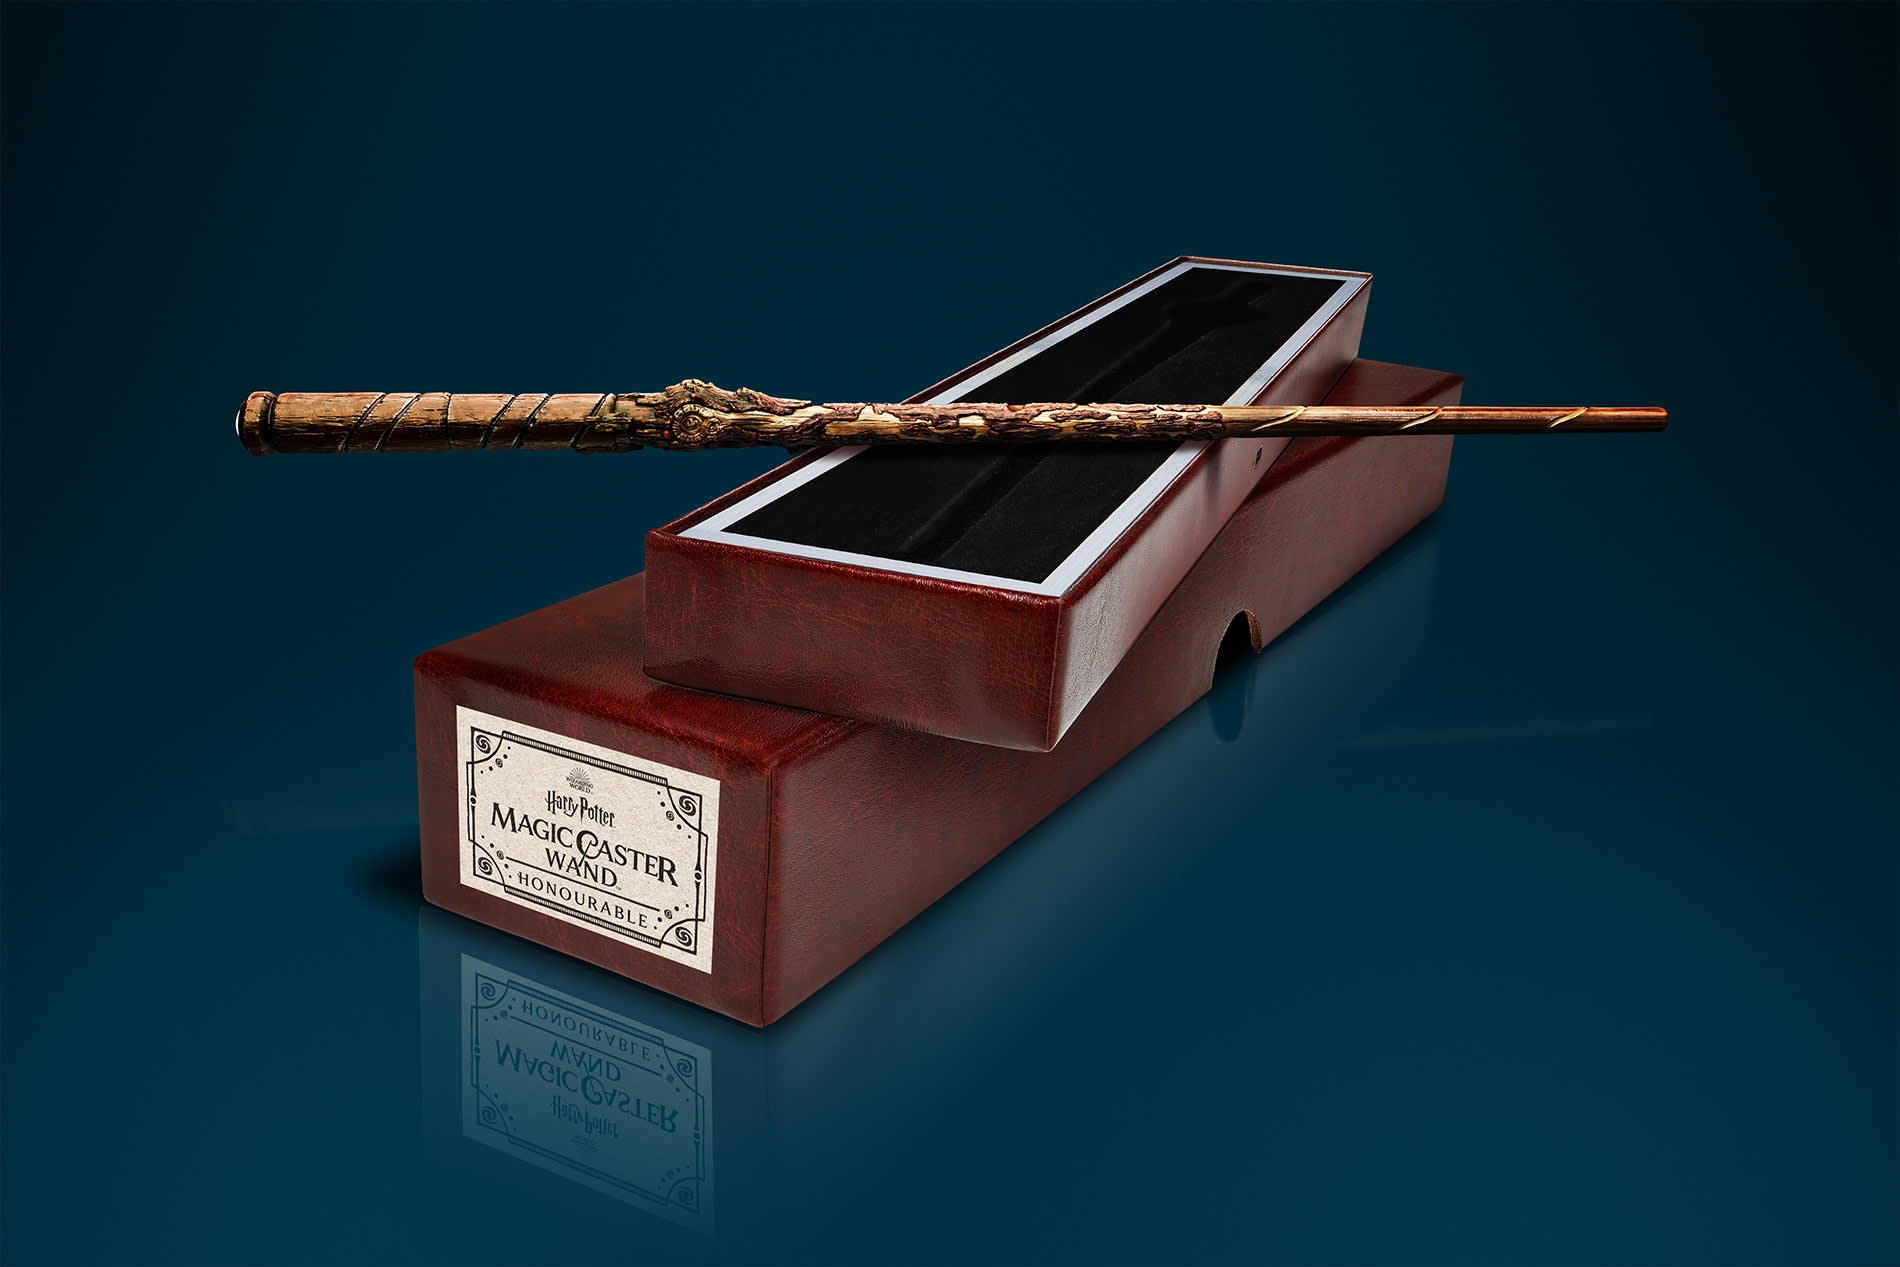 A wand presented outside of its box. This is the honourable design for the Magic Caster wand.